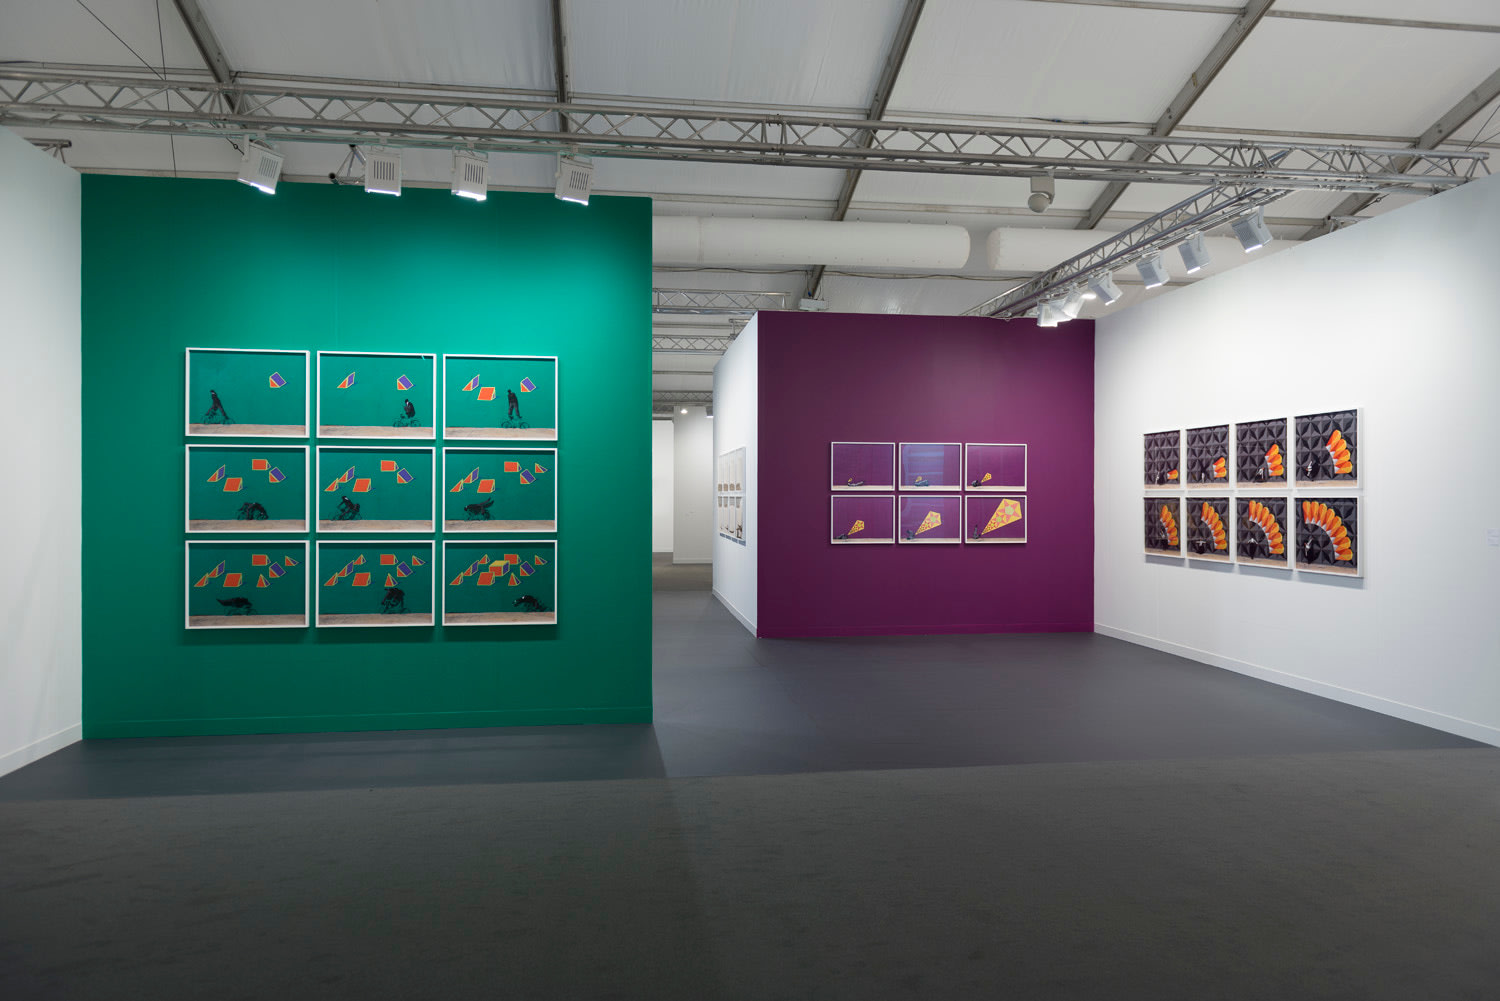 Installation view of Lehmann Maupin's booth at Frieze art fair in London 2019, view 2